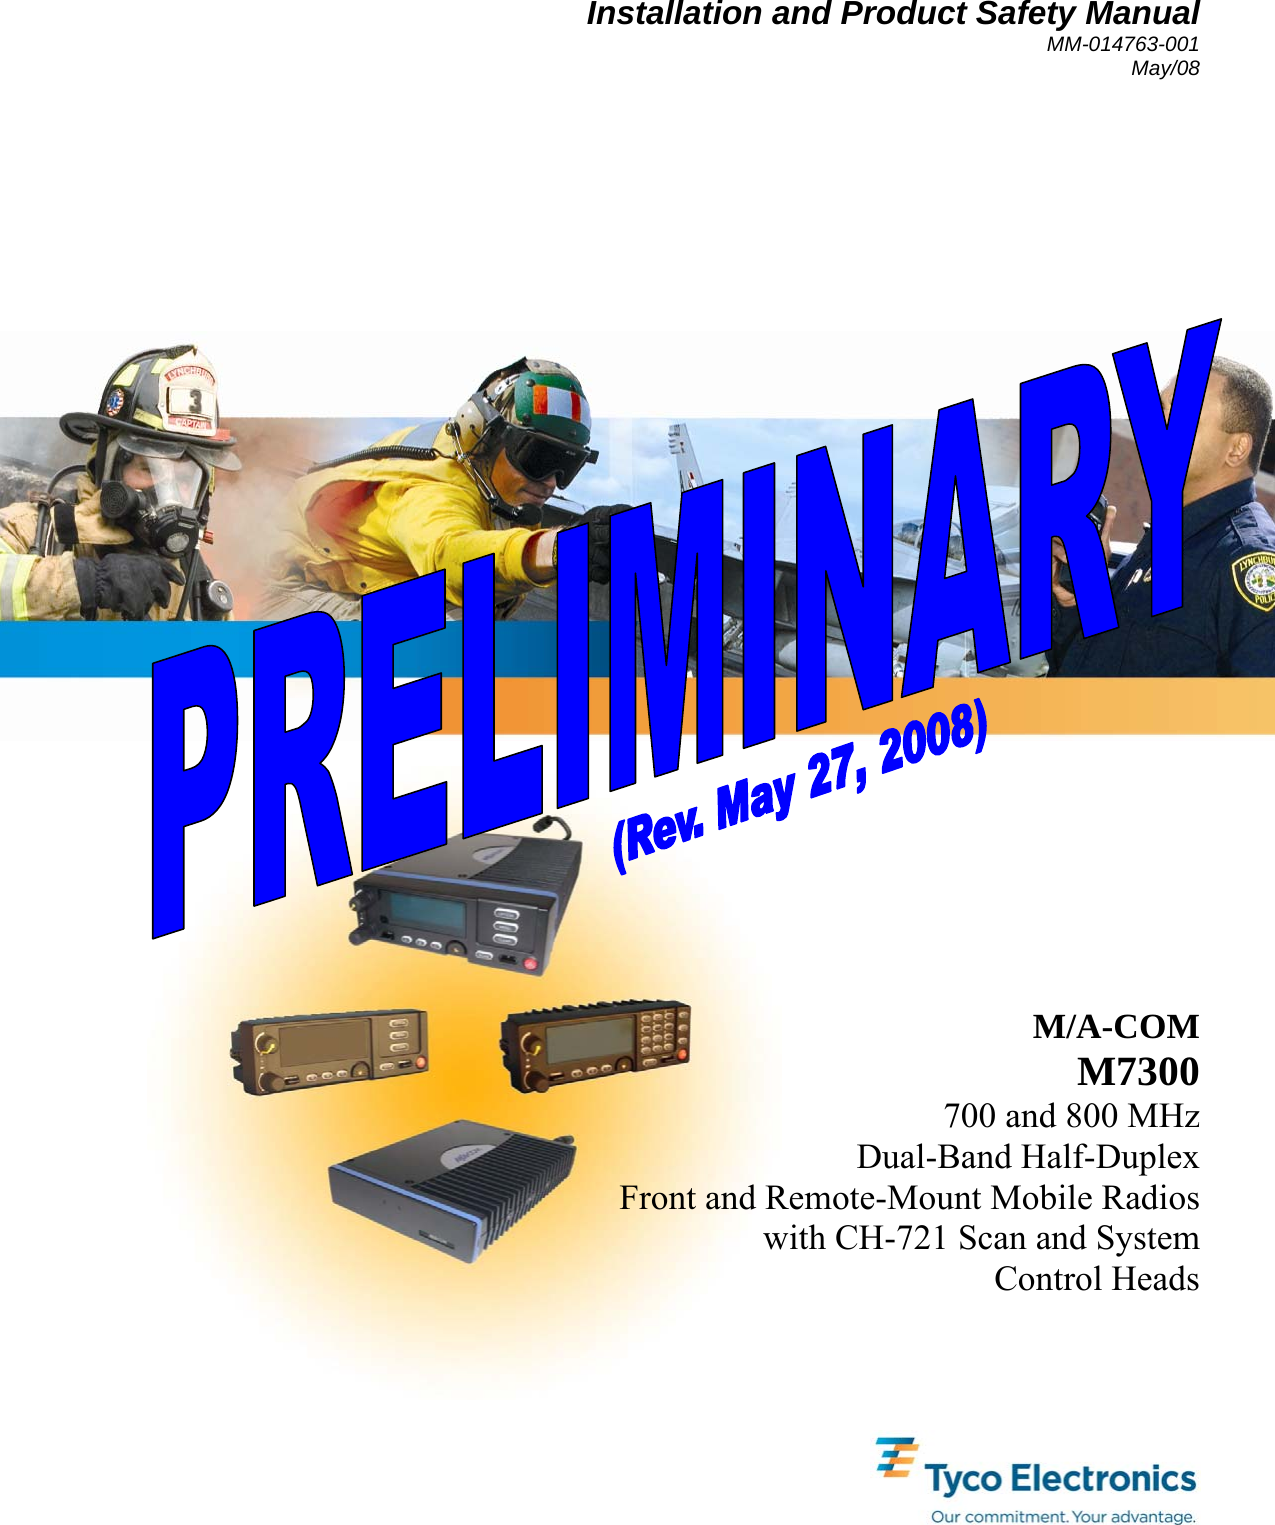 Installation and Product Safety Manual MM-014763-001 May/08  M/A-COM M7300 700 and 800 MHz Dual-Band Half-Duplex Front and Remote-Mount Mobile Radios with CH-721 Scan and System Control Heads 